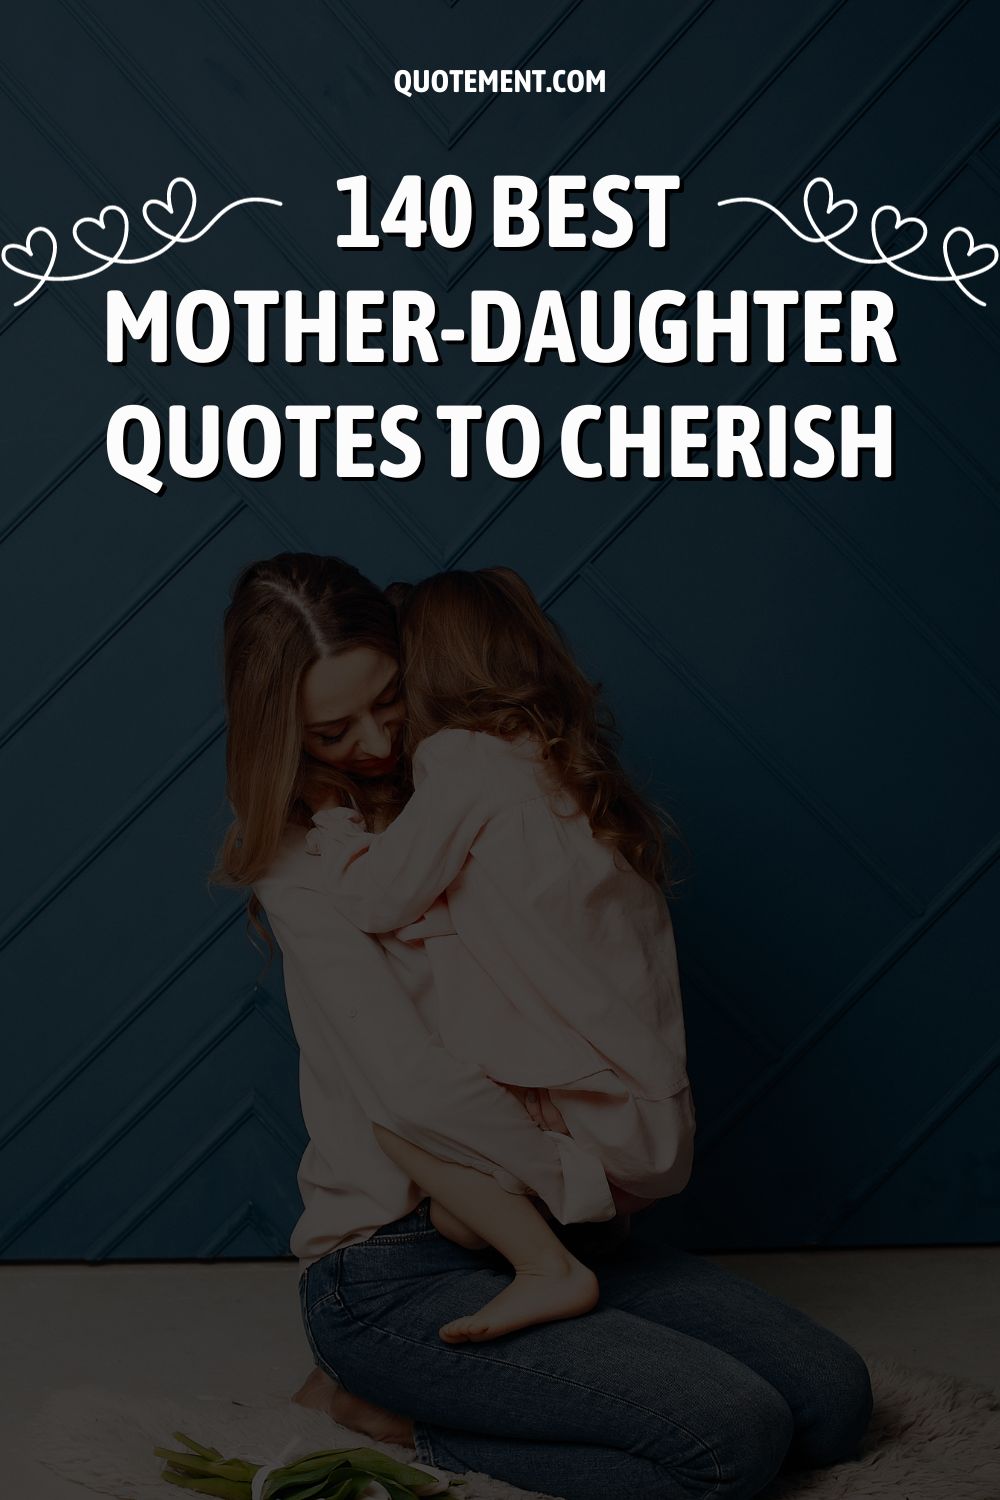 140 Mother-Daughter Quotes Celebrating This Special Bond 